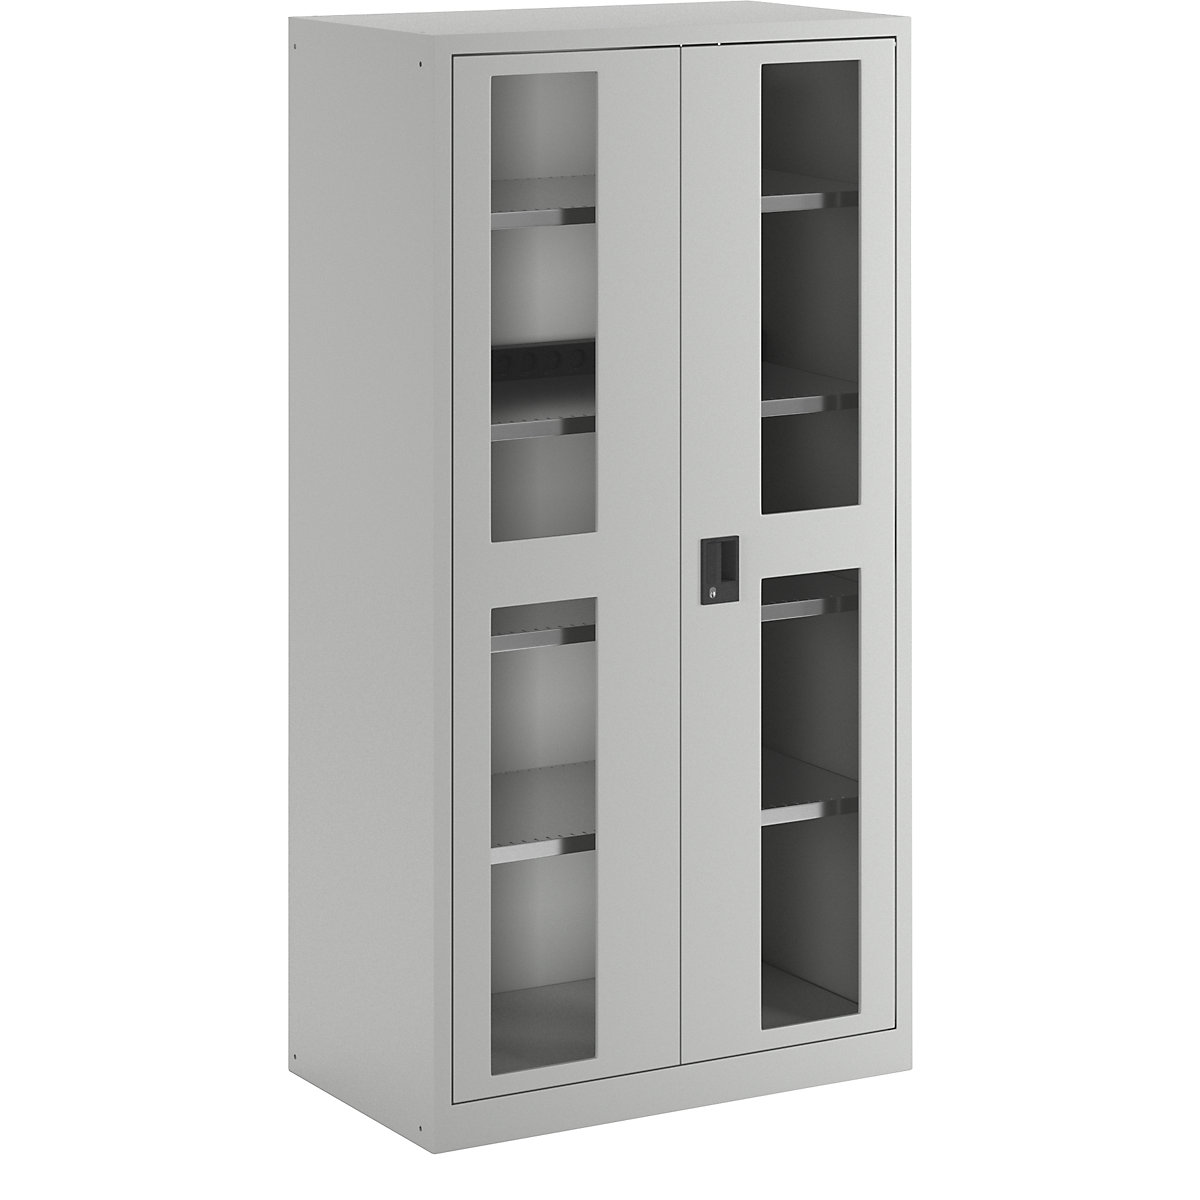 Battery charging cabinet – LISTA, 4 shelves, vision panel doors, power strip at rear, grey-24